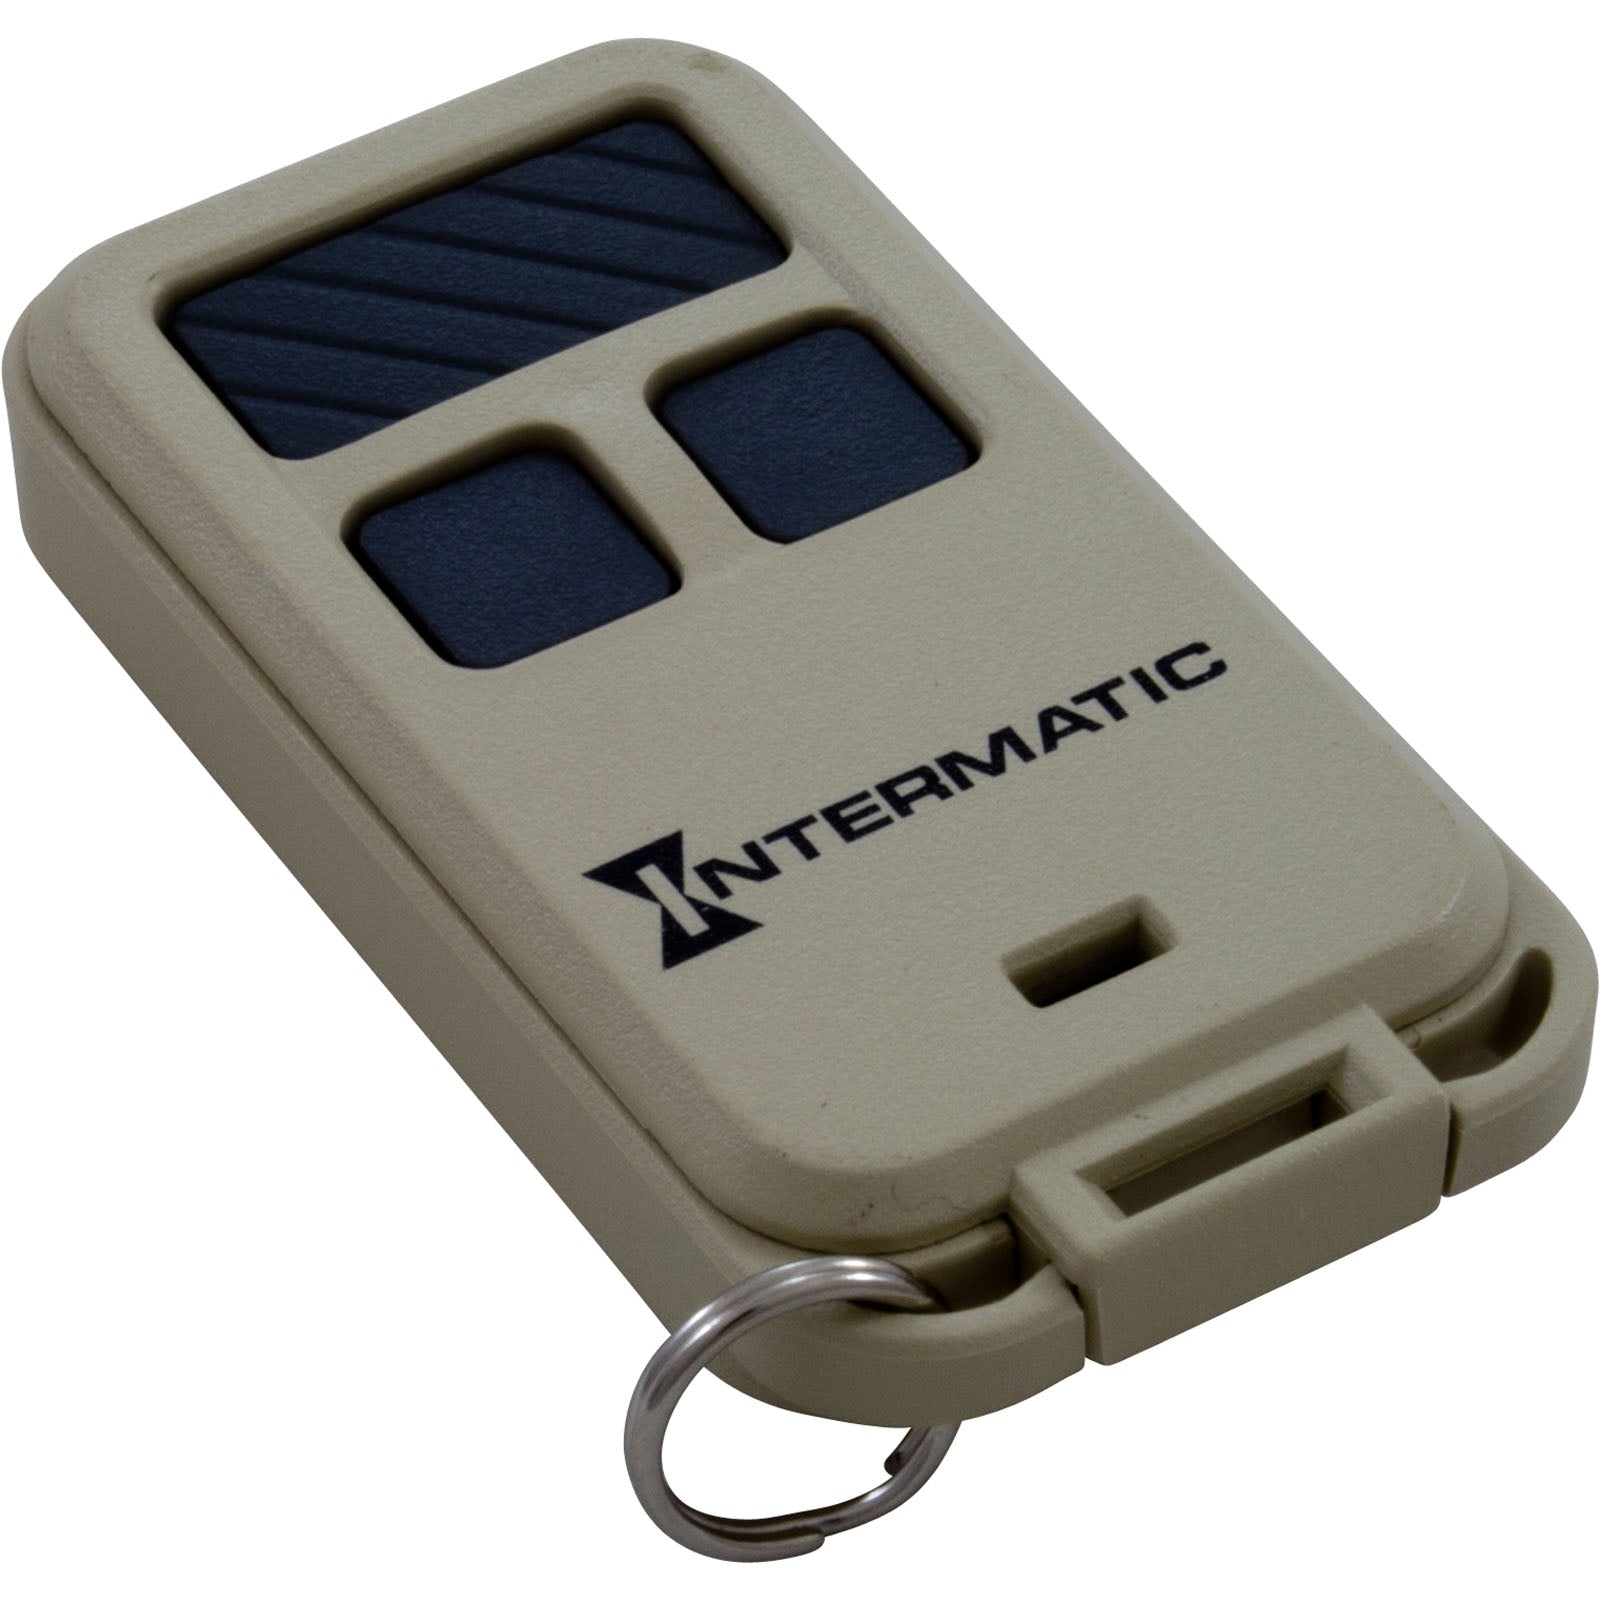 Intermatic RC939 Transmitter [3 Channel] (RC939)